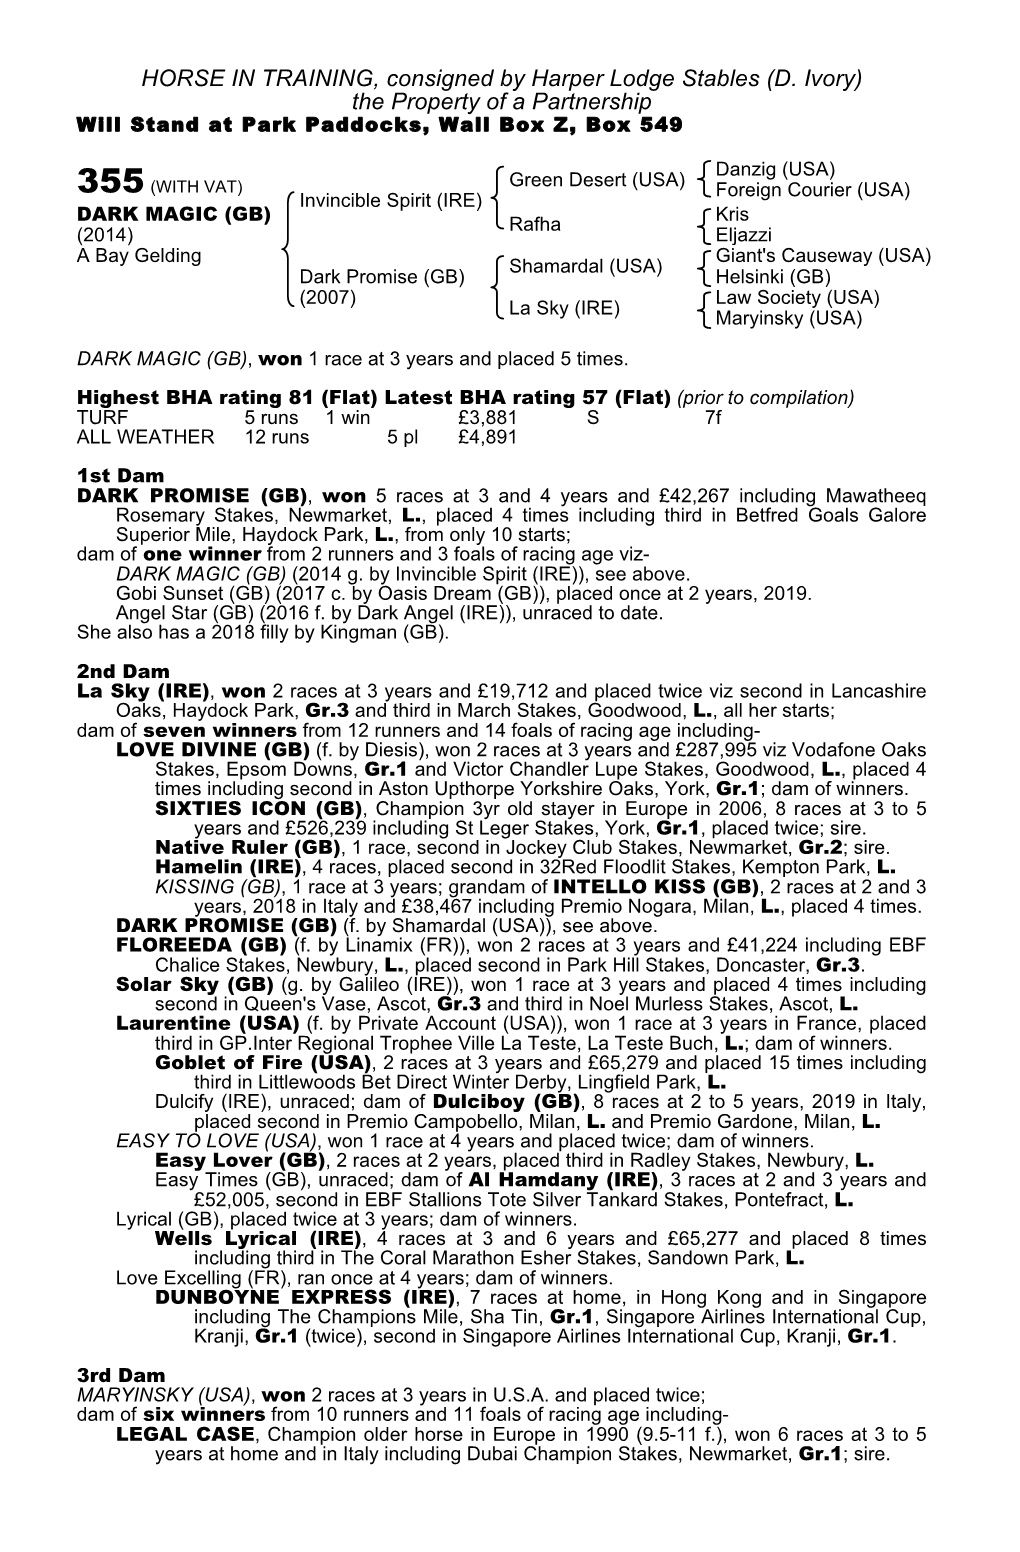 HORSE in TRAINING, Consigned by Harper Lodge Stables (D. Ivory) the Property of a Partnership Will Stand at Park Paddocks, Wall Box Z, Box 549